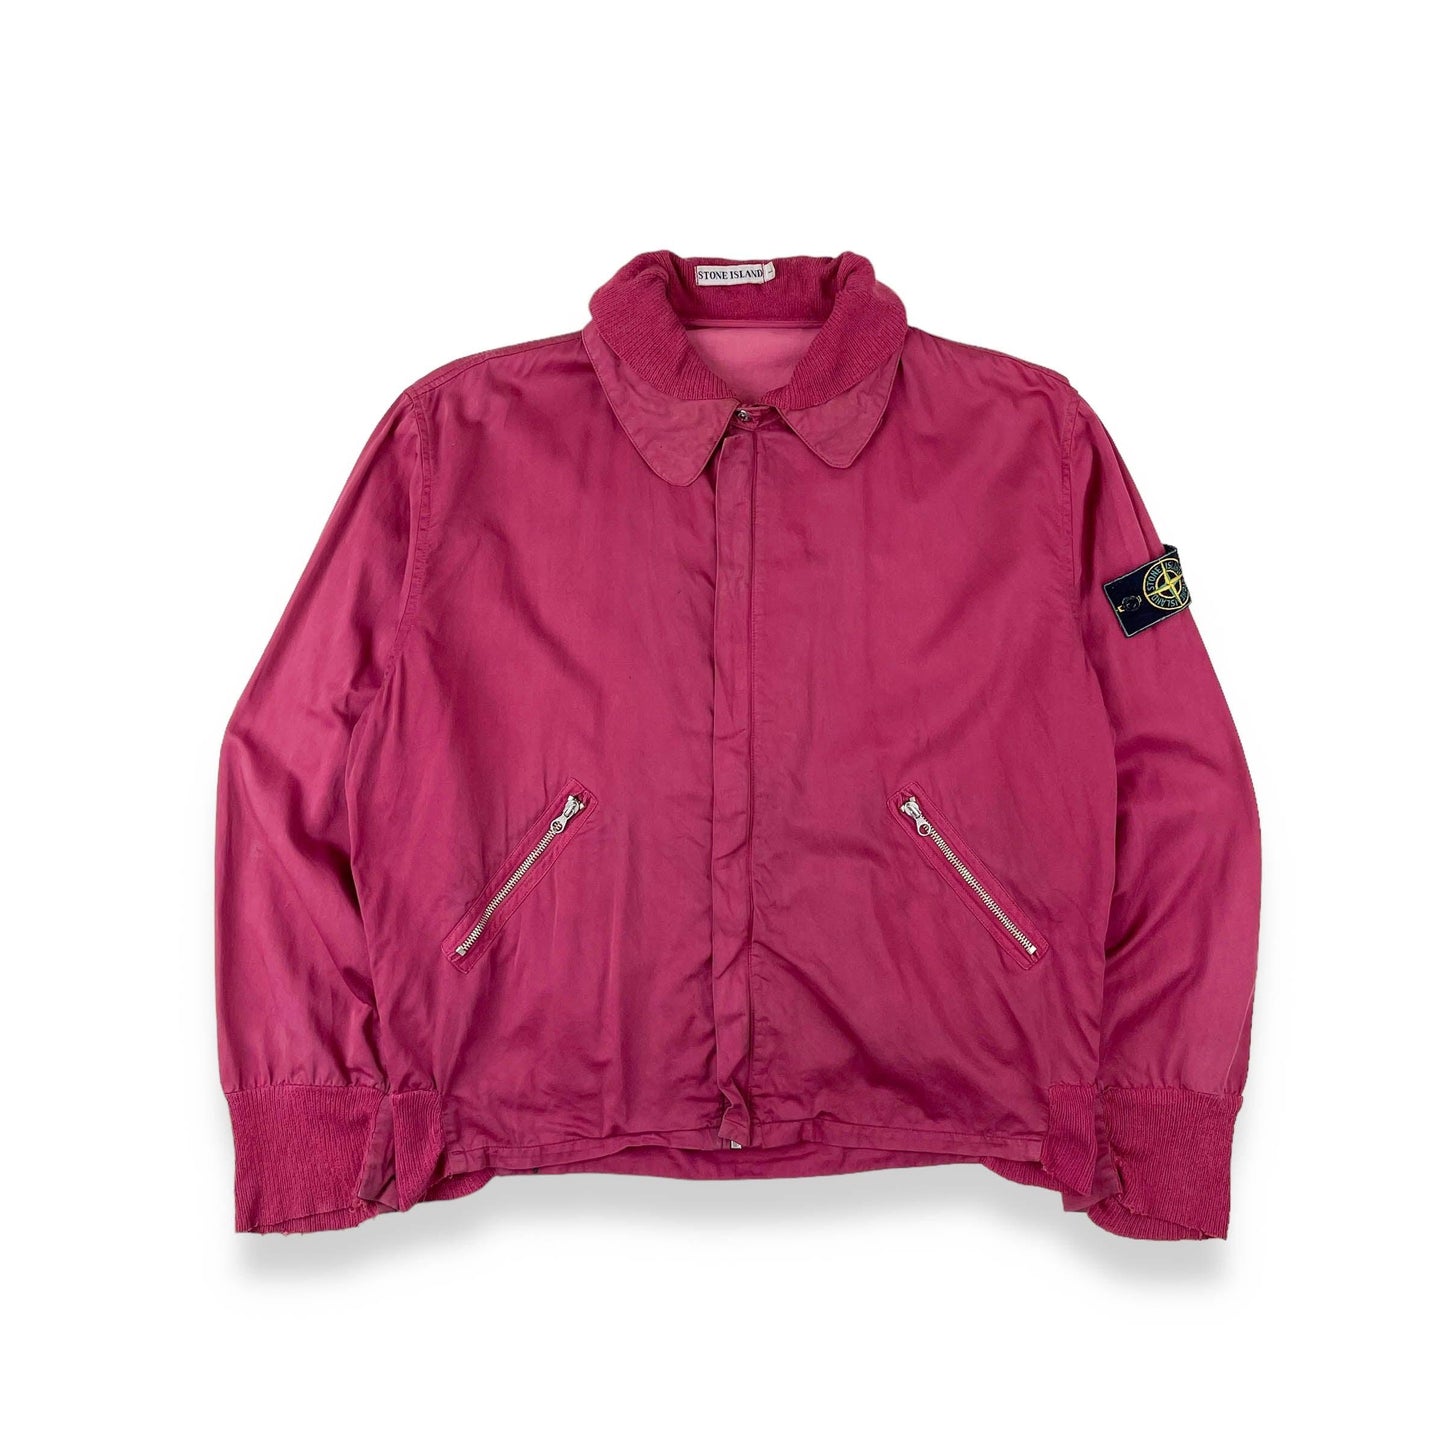 Vintage Stone Island Double Collar Bomber (L) - Known Source